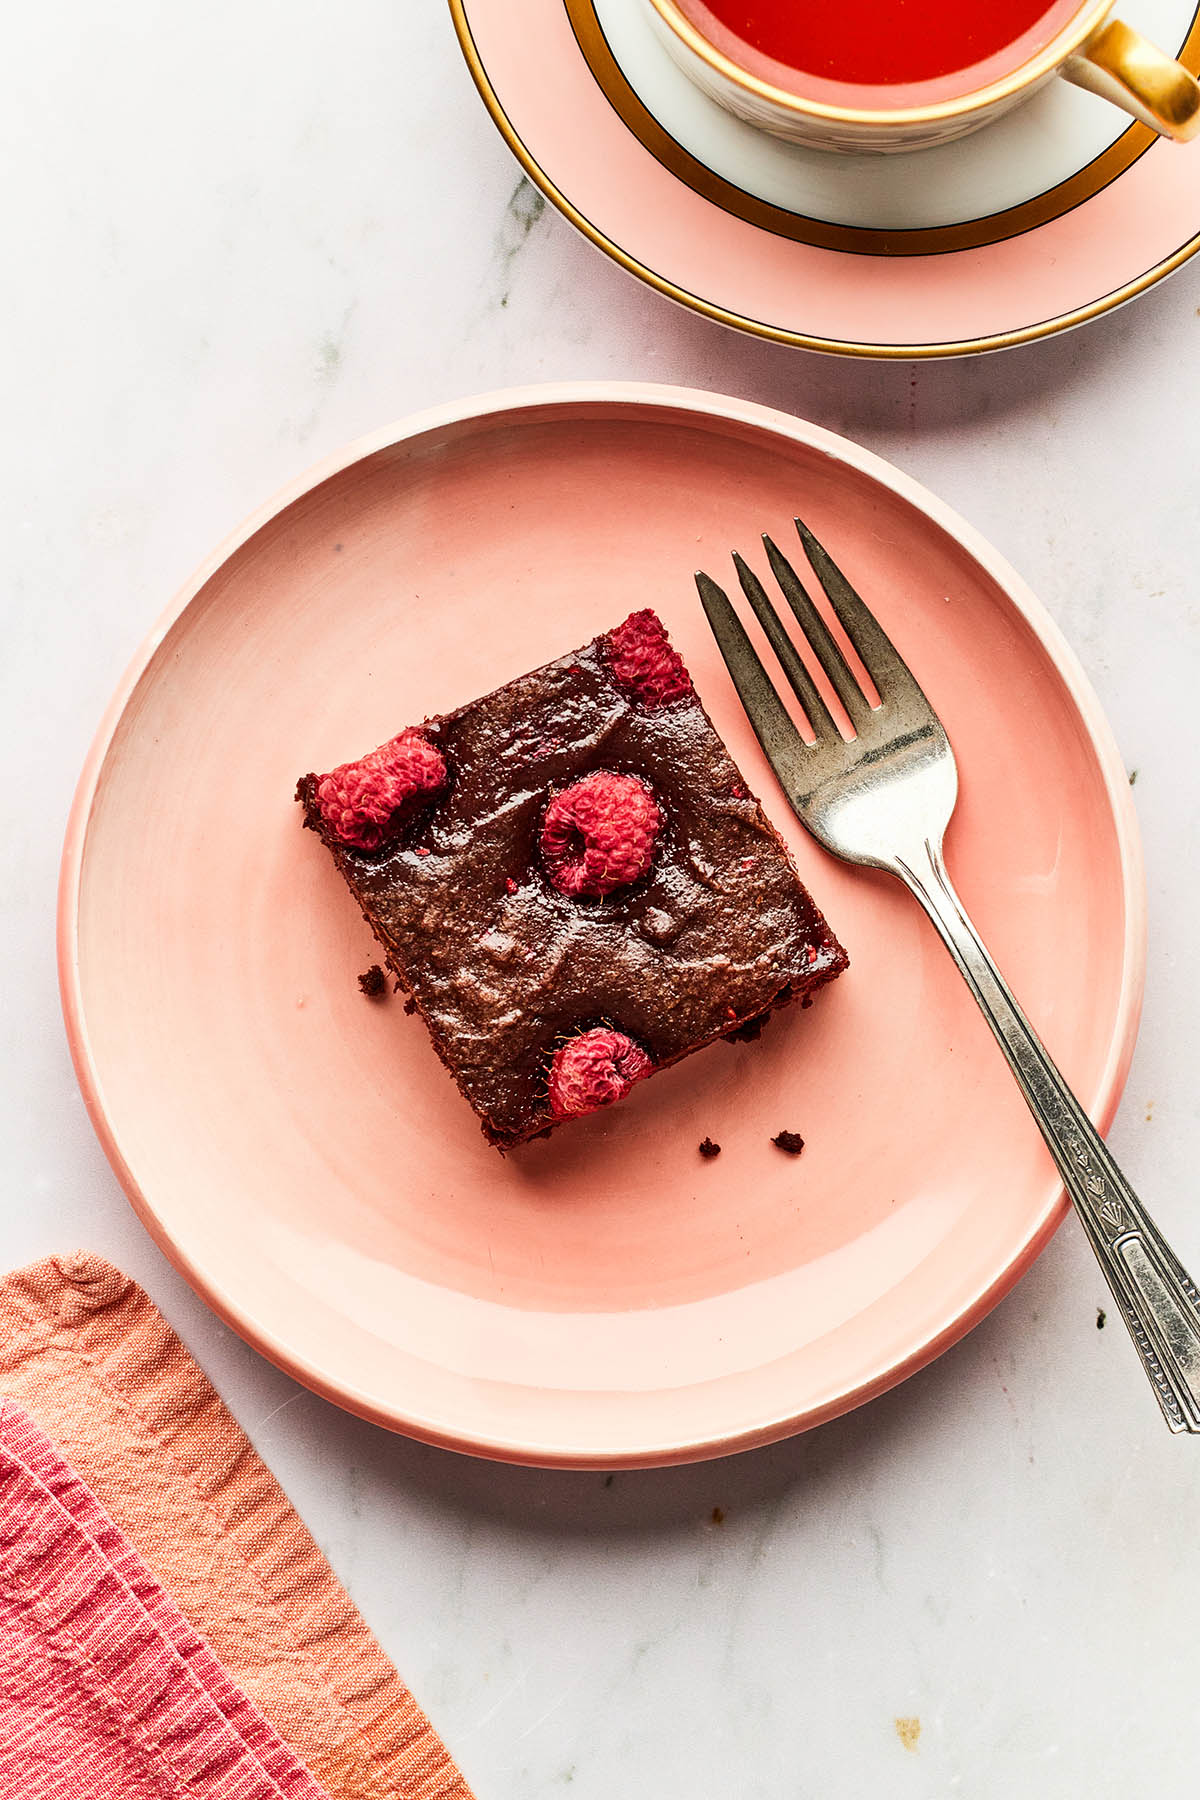 Oberhead image of one raspberry brownie on a pink plate with a fork.